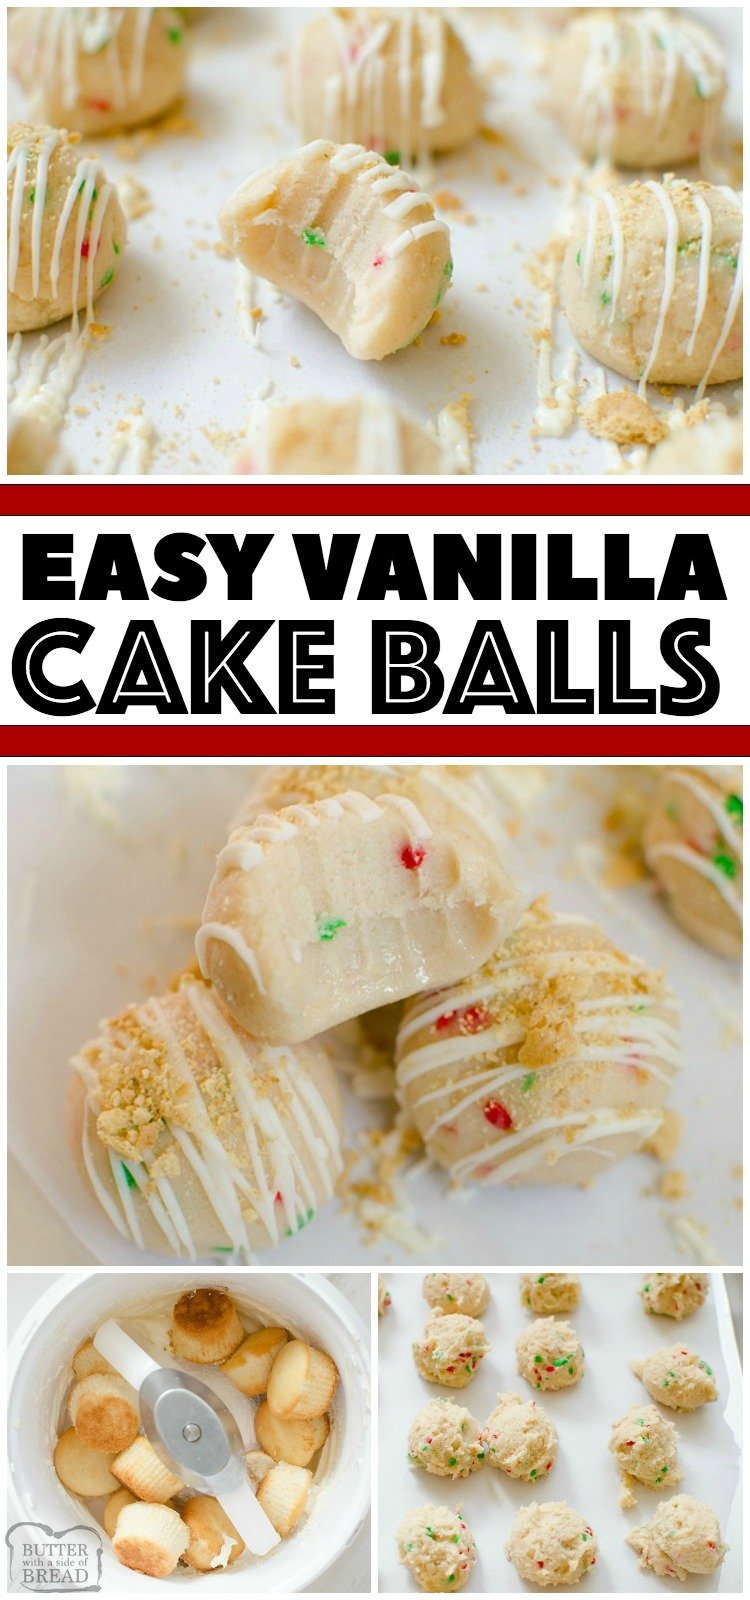 Vanilla Cake Balls are an easy dessert made from cake and homemade vanilla buttercream frosting. Simple to make cake ball recipe that everyone loves! Make your Cake Balls festive for Christmas by adding in colored sprinkles! #vanilla #cake #cakeballs #cakebites #Christmas #dessert #recipe from BUTTER WITH A SIDE OF BREAD